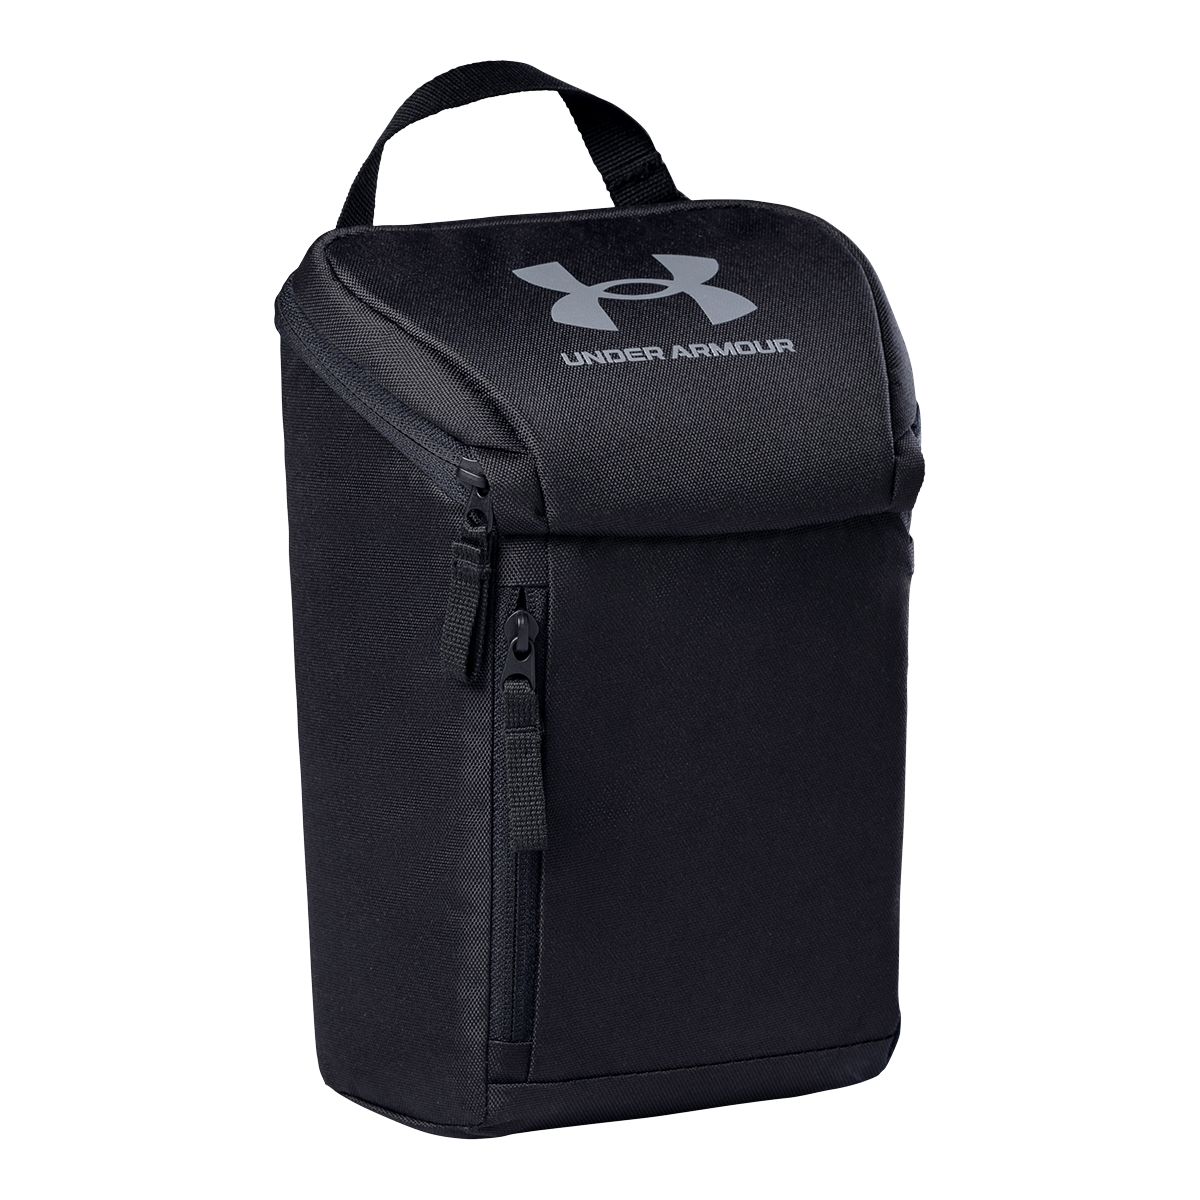 Under Armour Lunch Bag